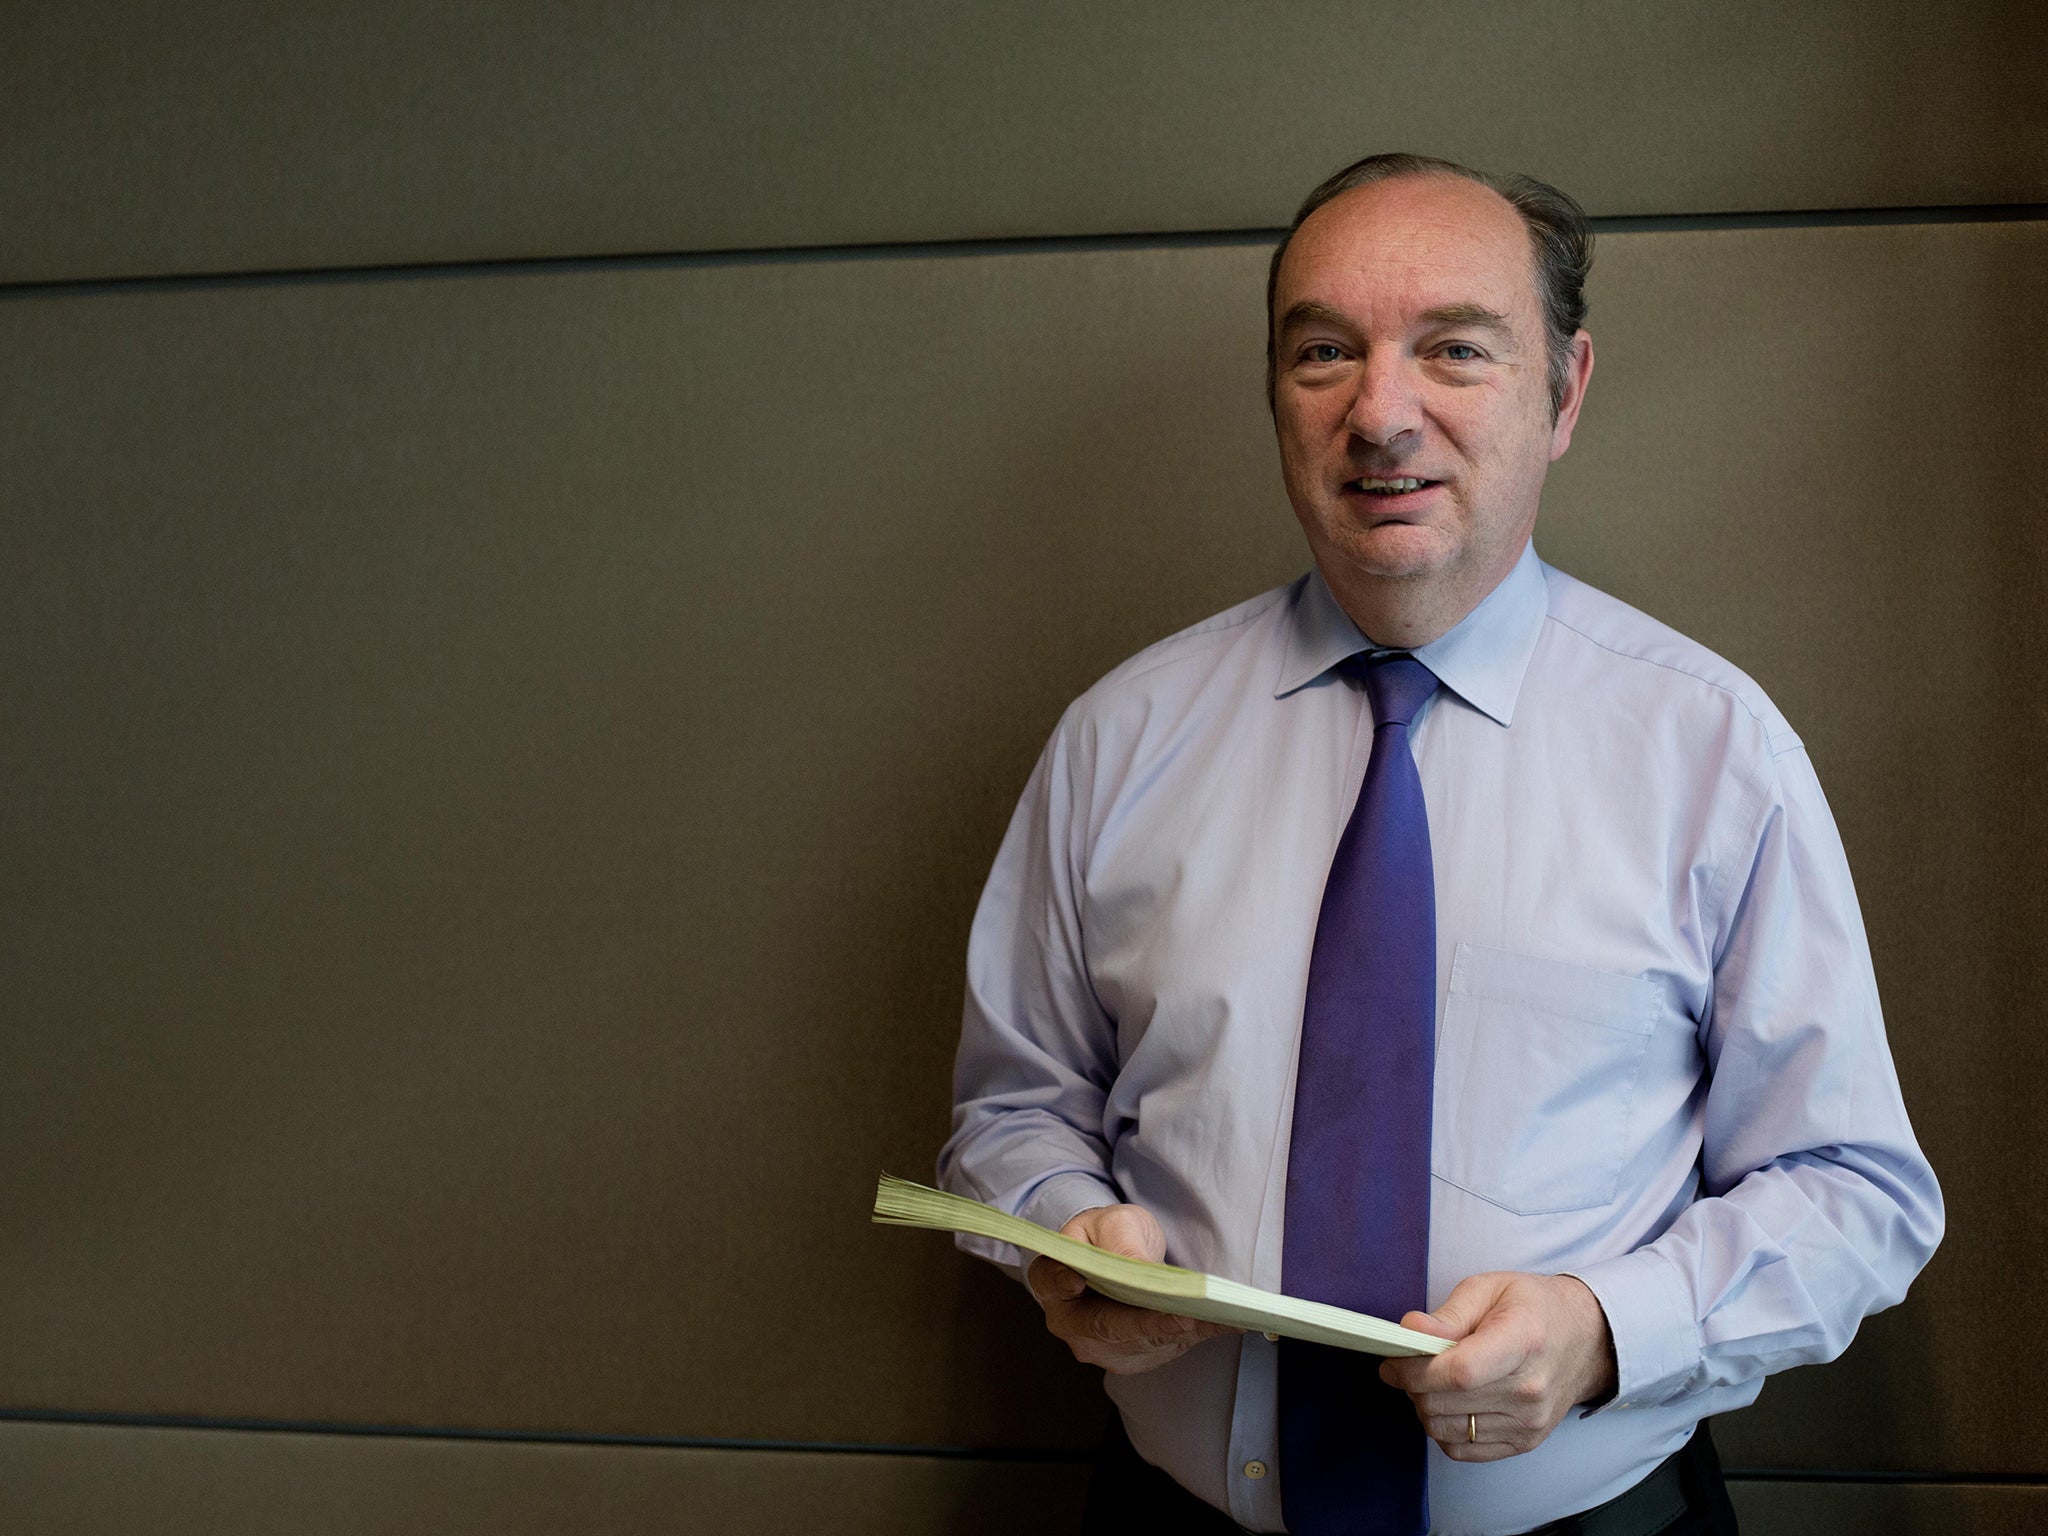 ‘This is not care or compassion but something closer to vindictiveness,’ says Norman Baker